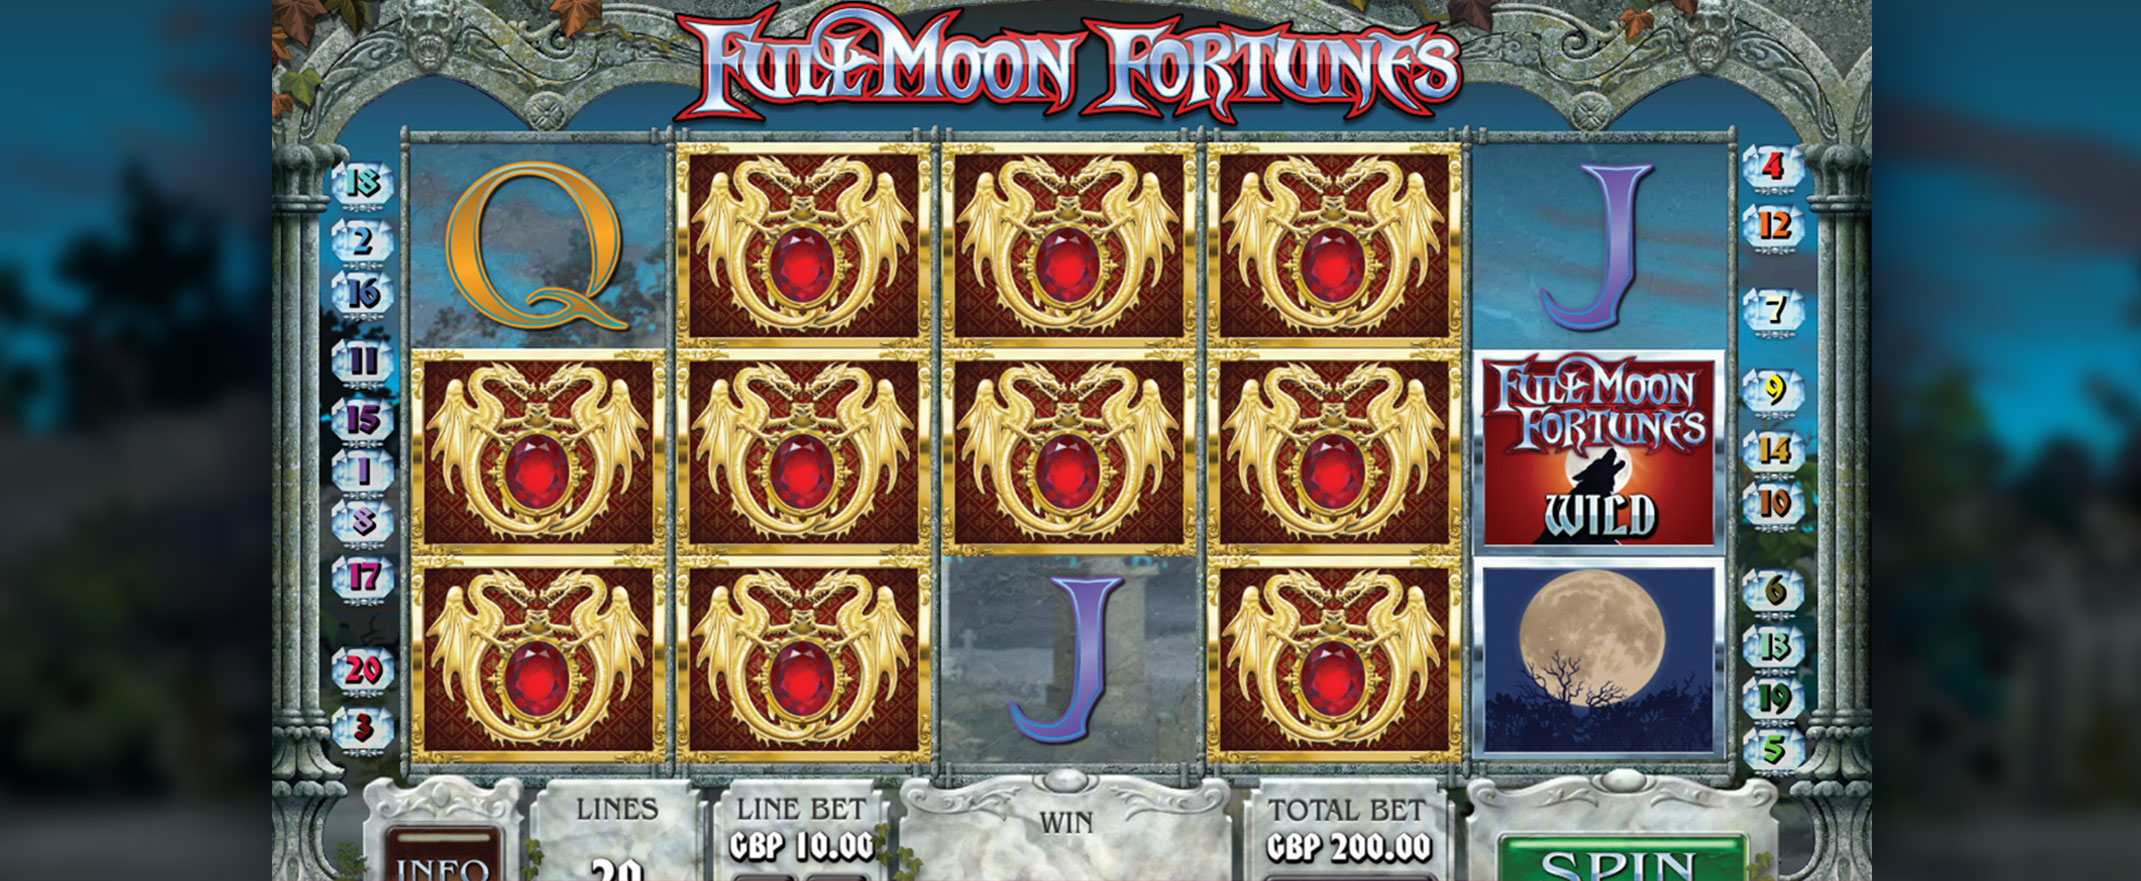 Full Moon Fortunes spilleautomat